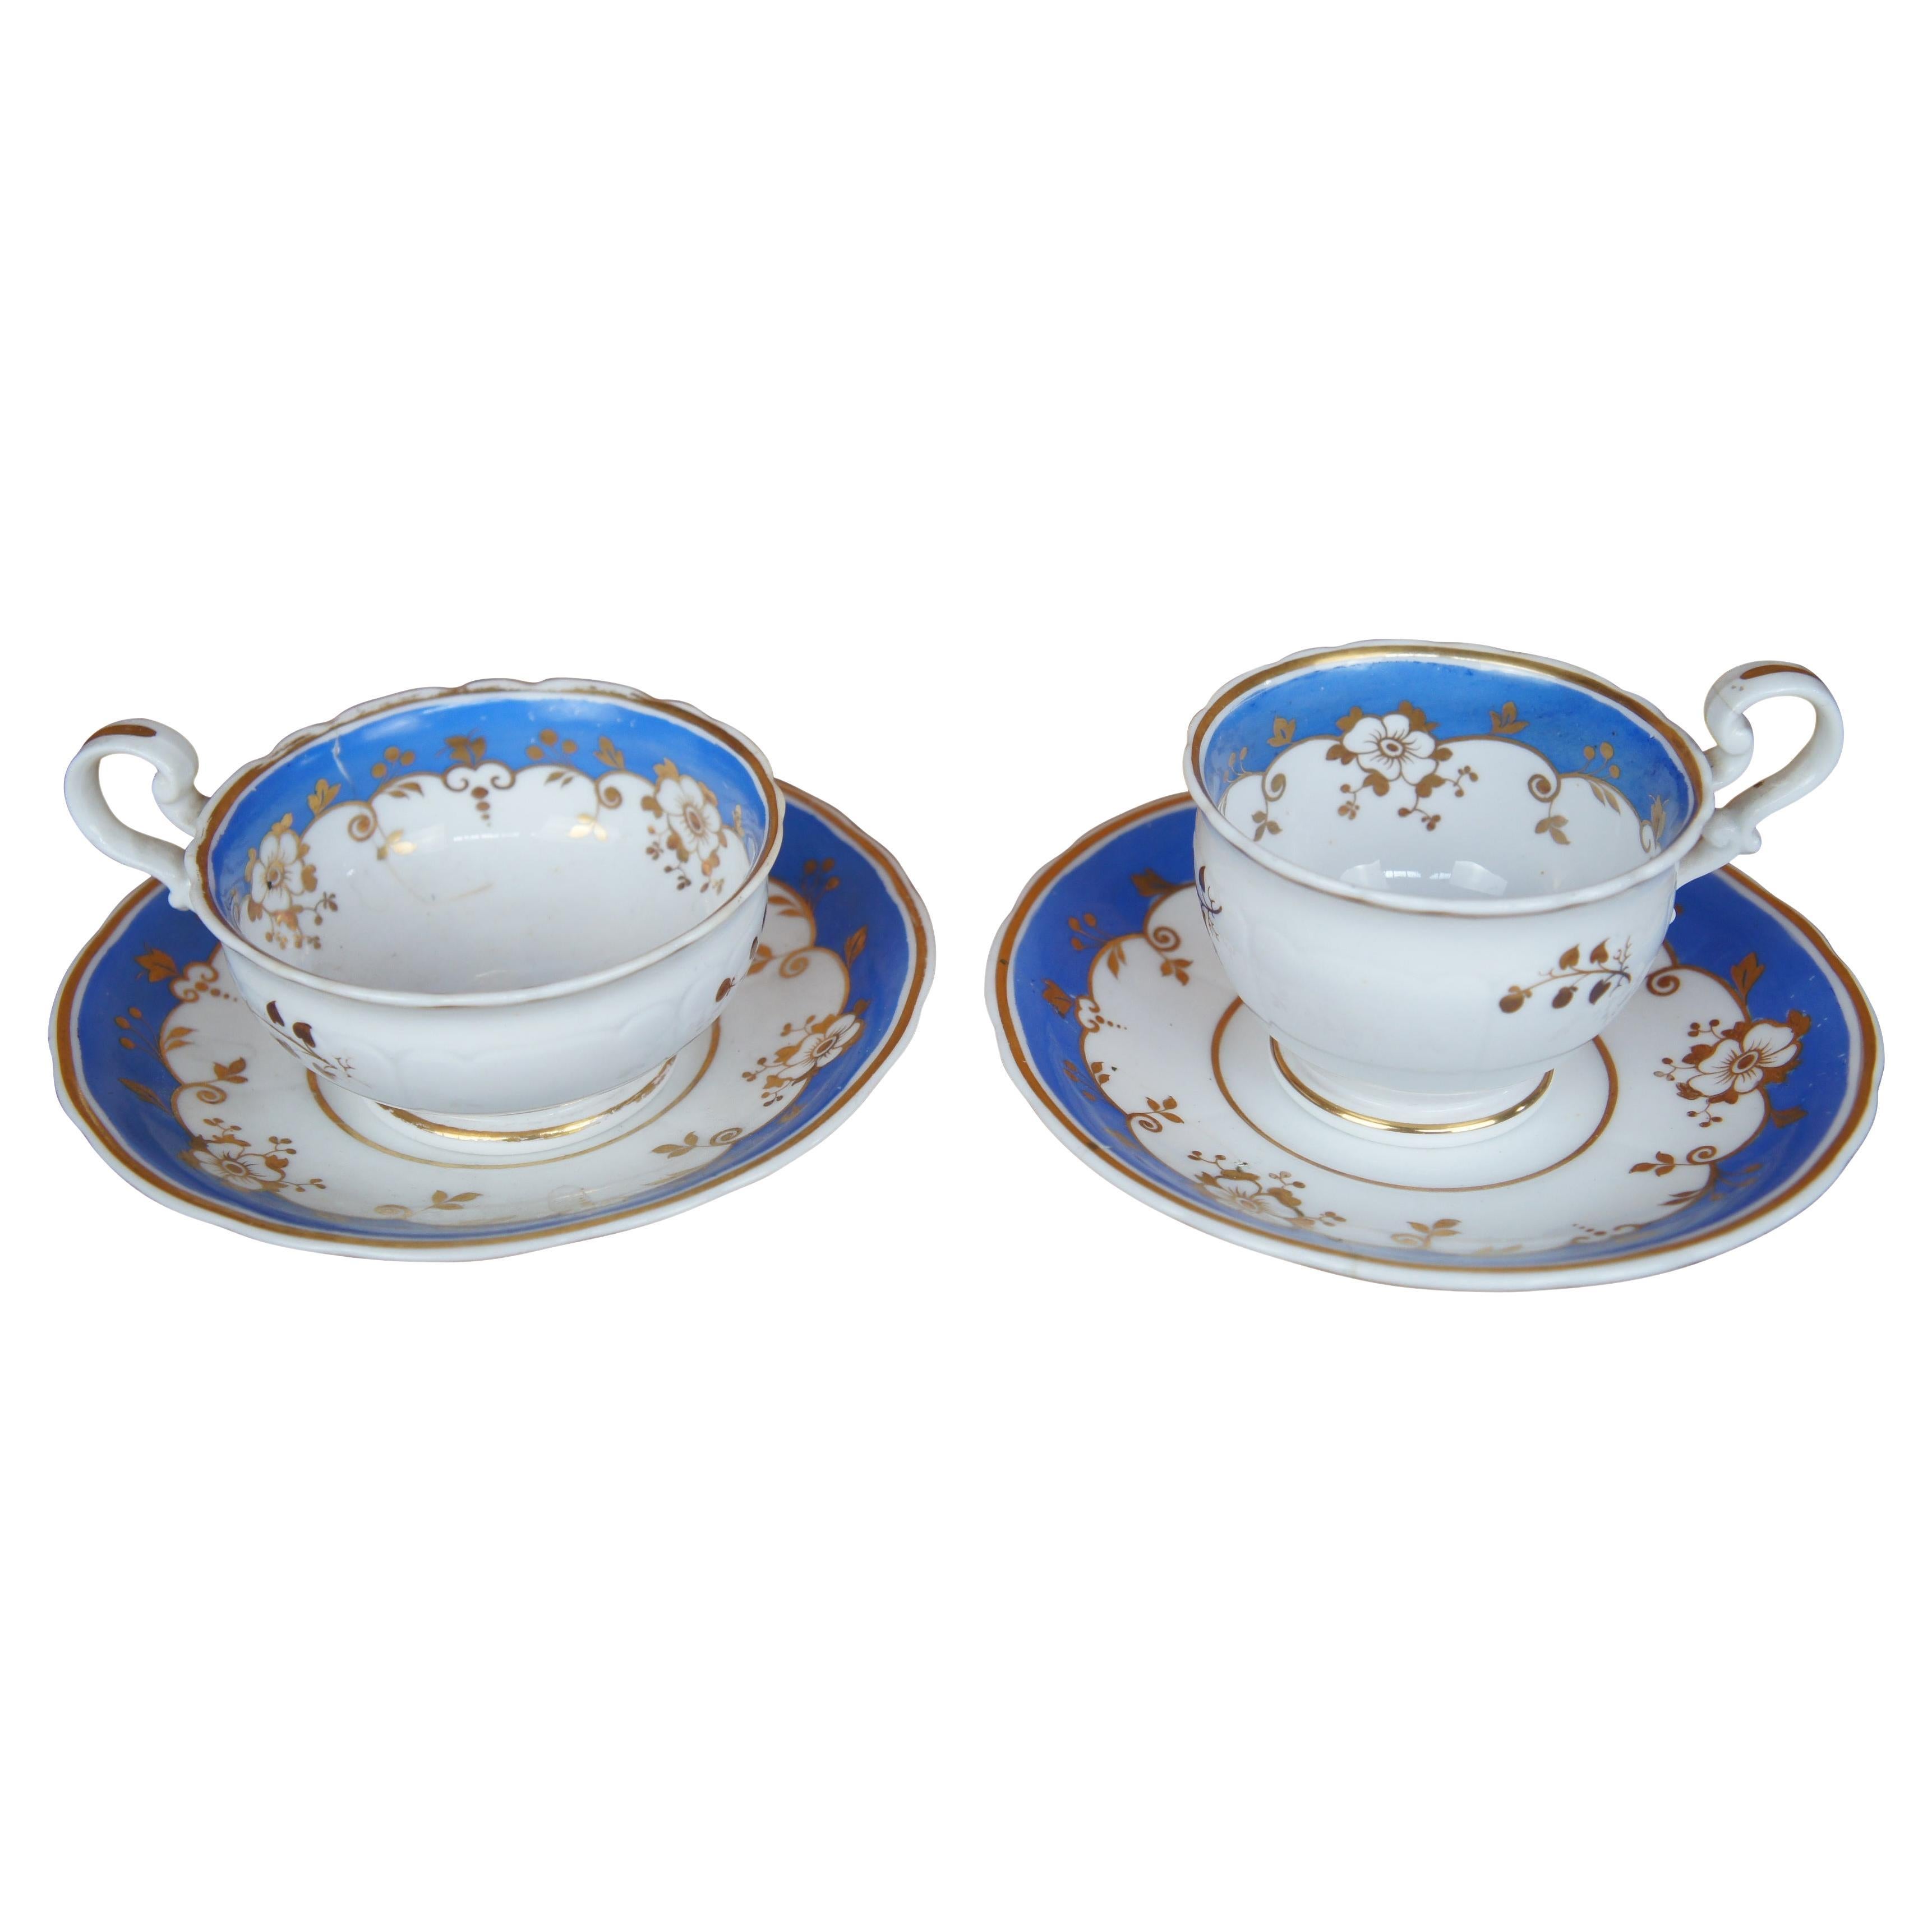 2 Antique 19th Century English Samuel Alcock Blue Gold Floral Cups & Saucers For Sale